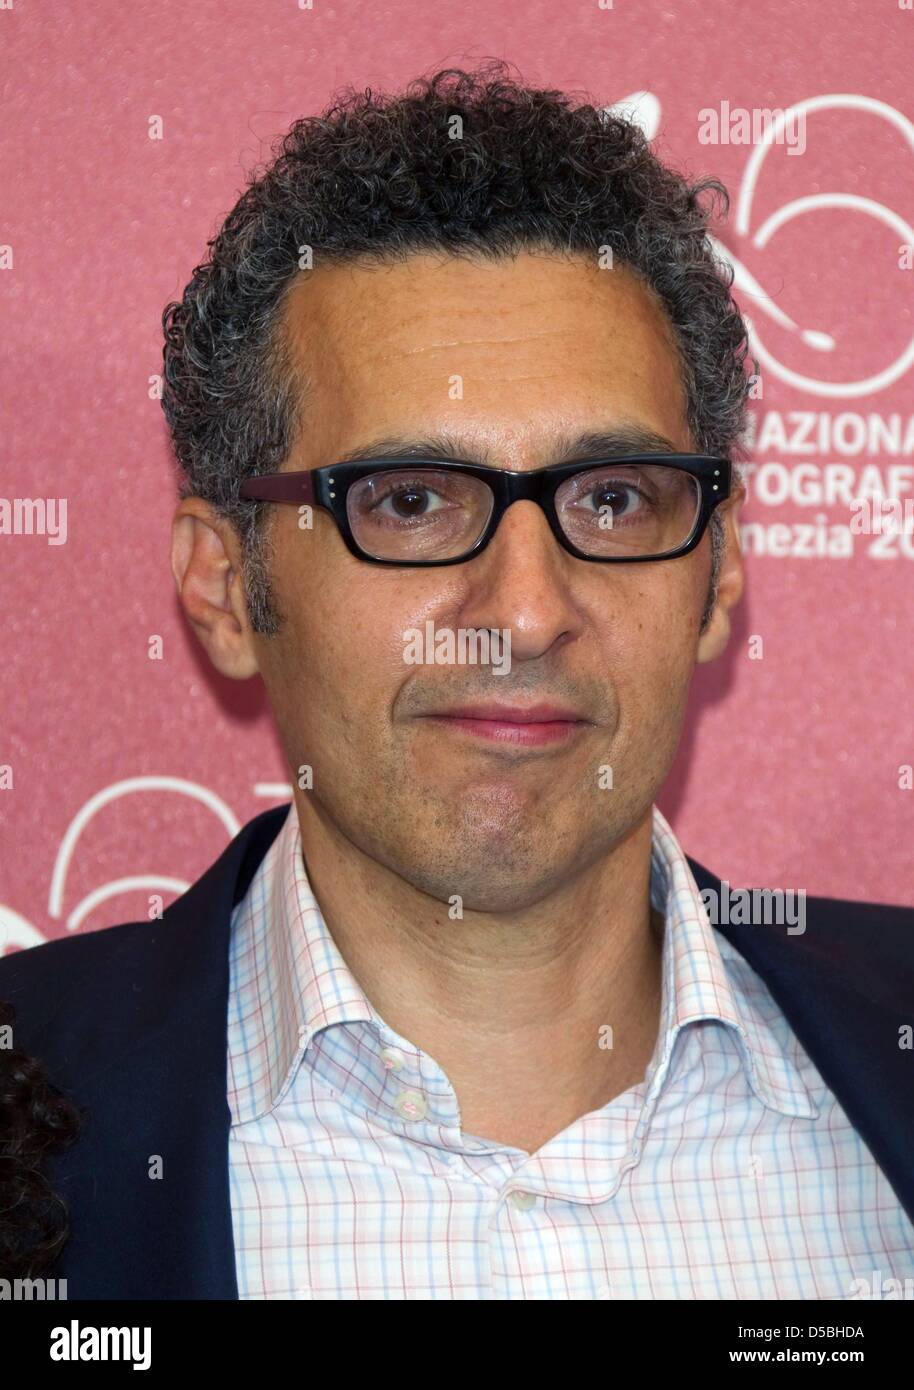 US actor and director John Turturro attends the photocall for the film 'Passione' at the 67th annual Venice Film Festival in Venice, Italy, 04 September 2010. The film is presented out of competition at the festival running from 01 to 11 September. Photo: Hubert Boesl Stock Photo